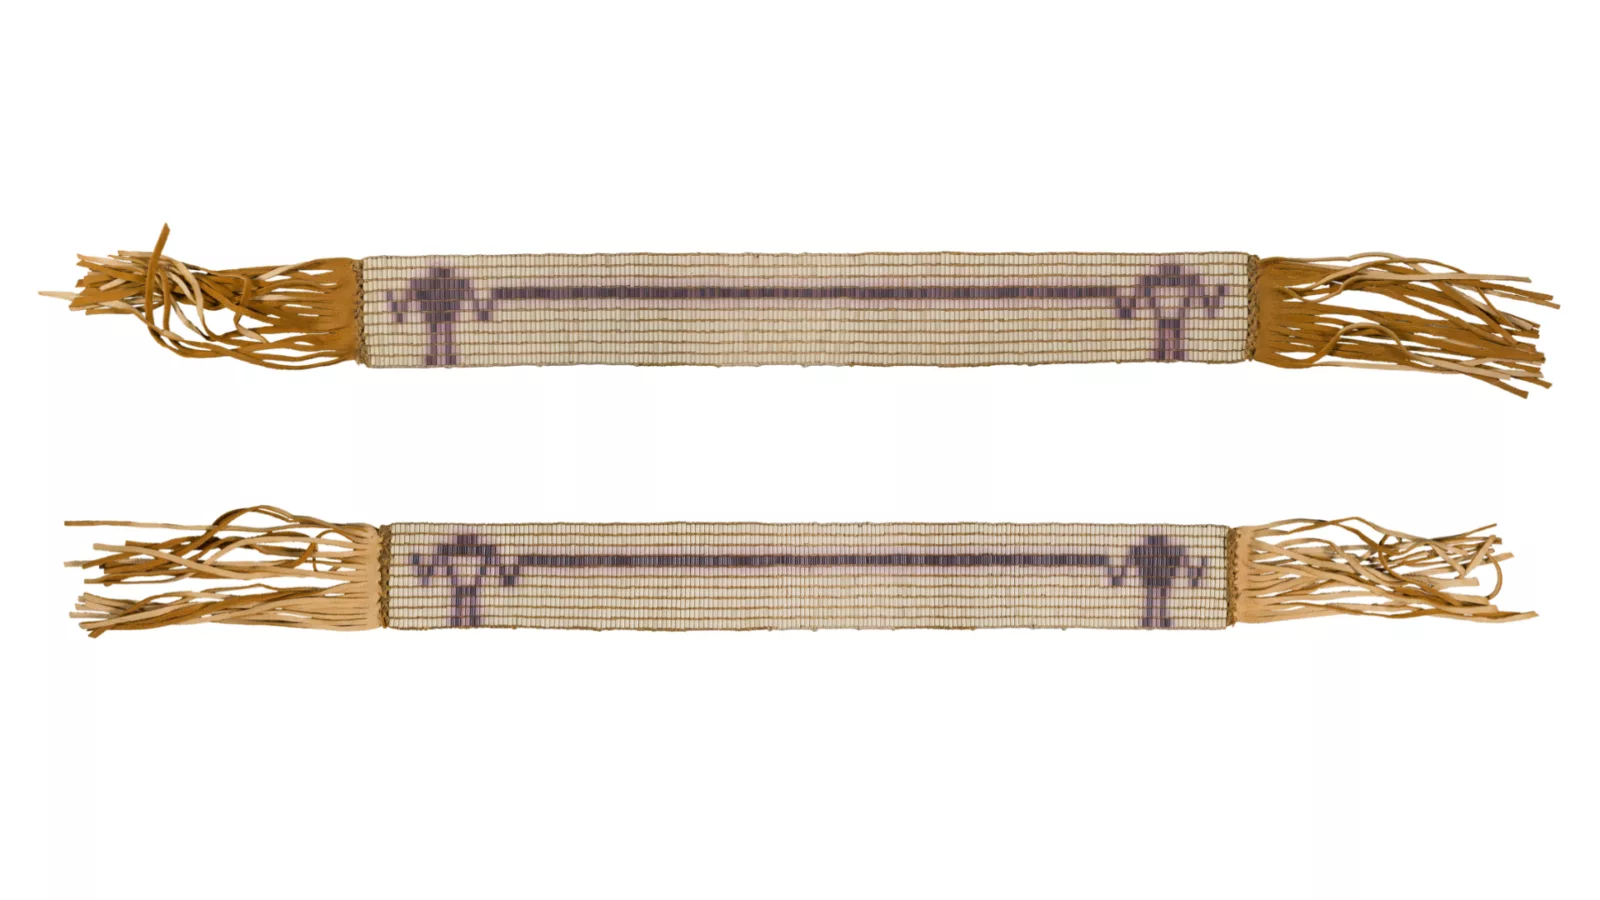 The front and back of a Wampum belt in purple and white beads